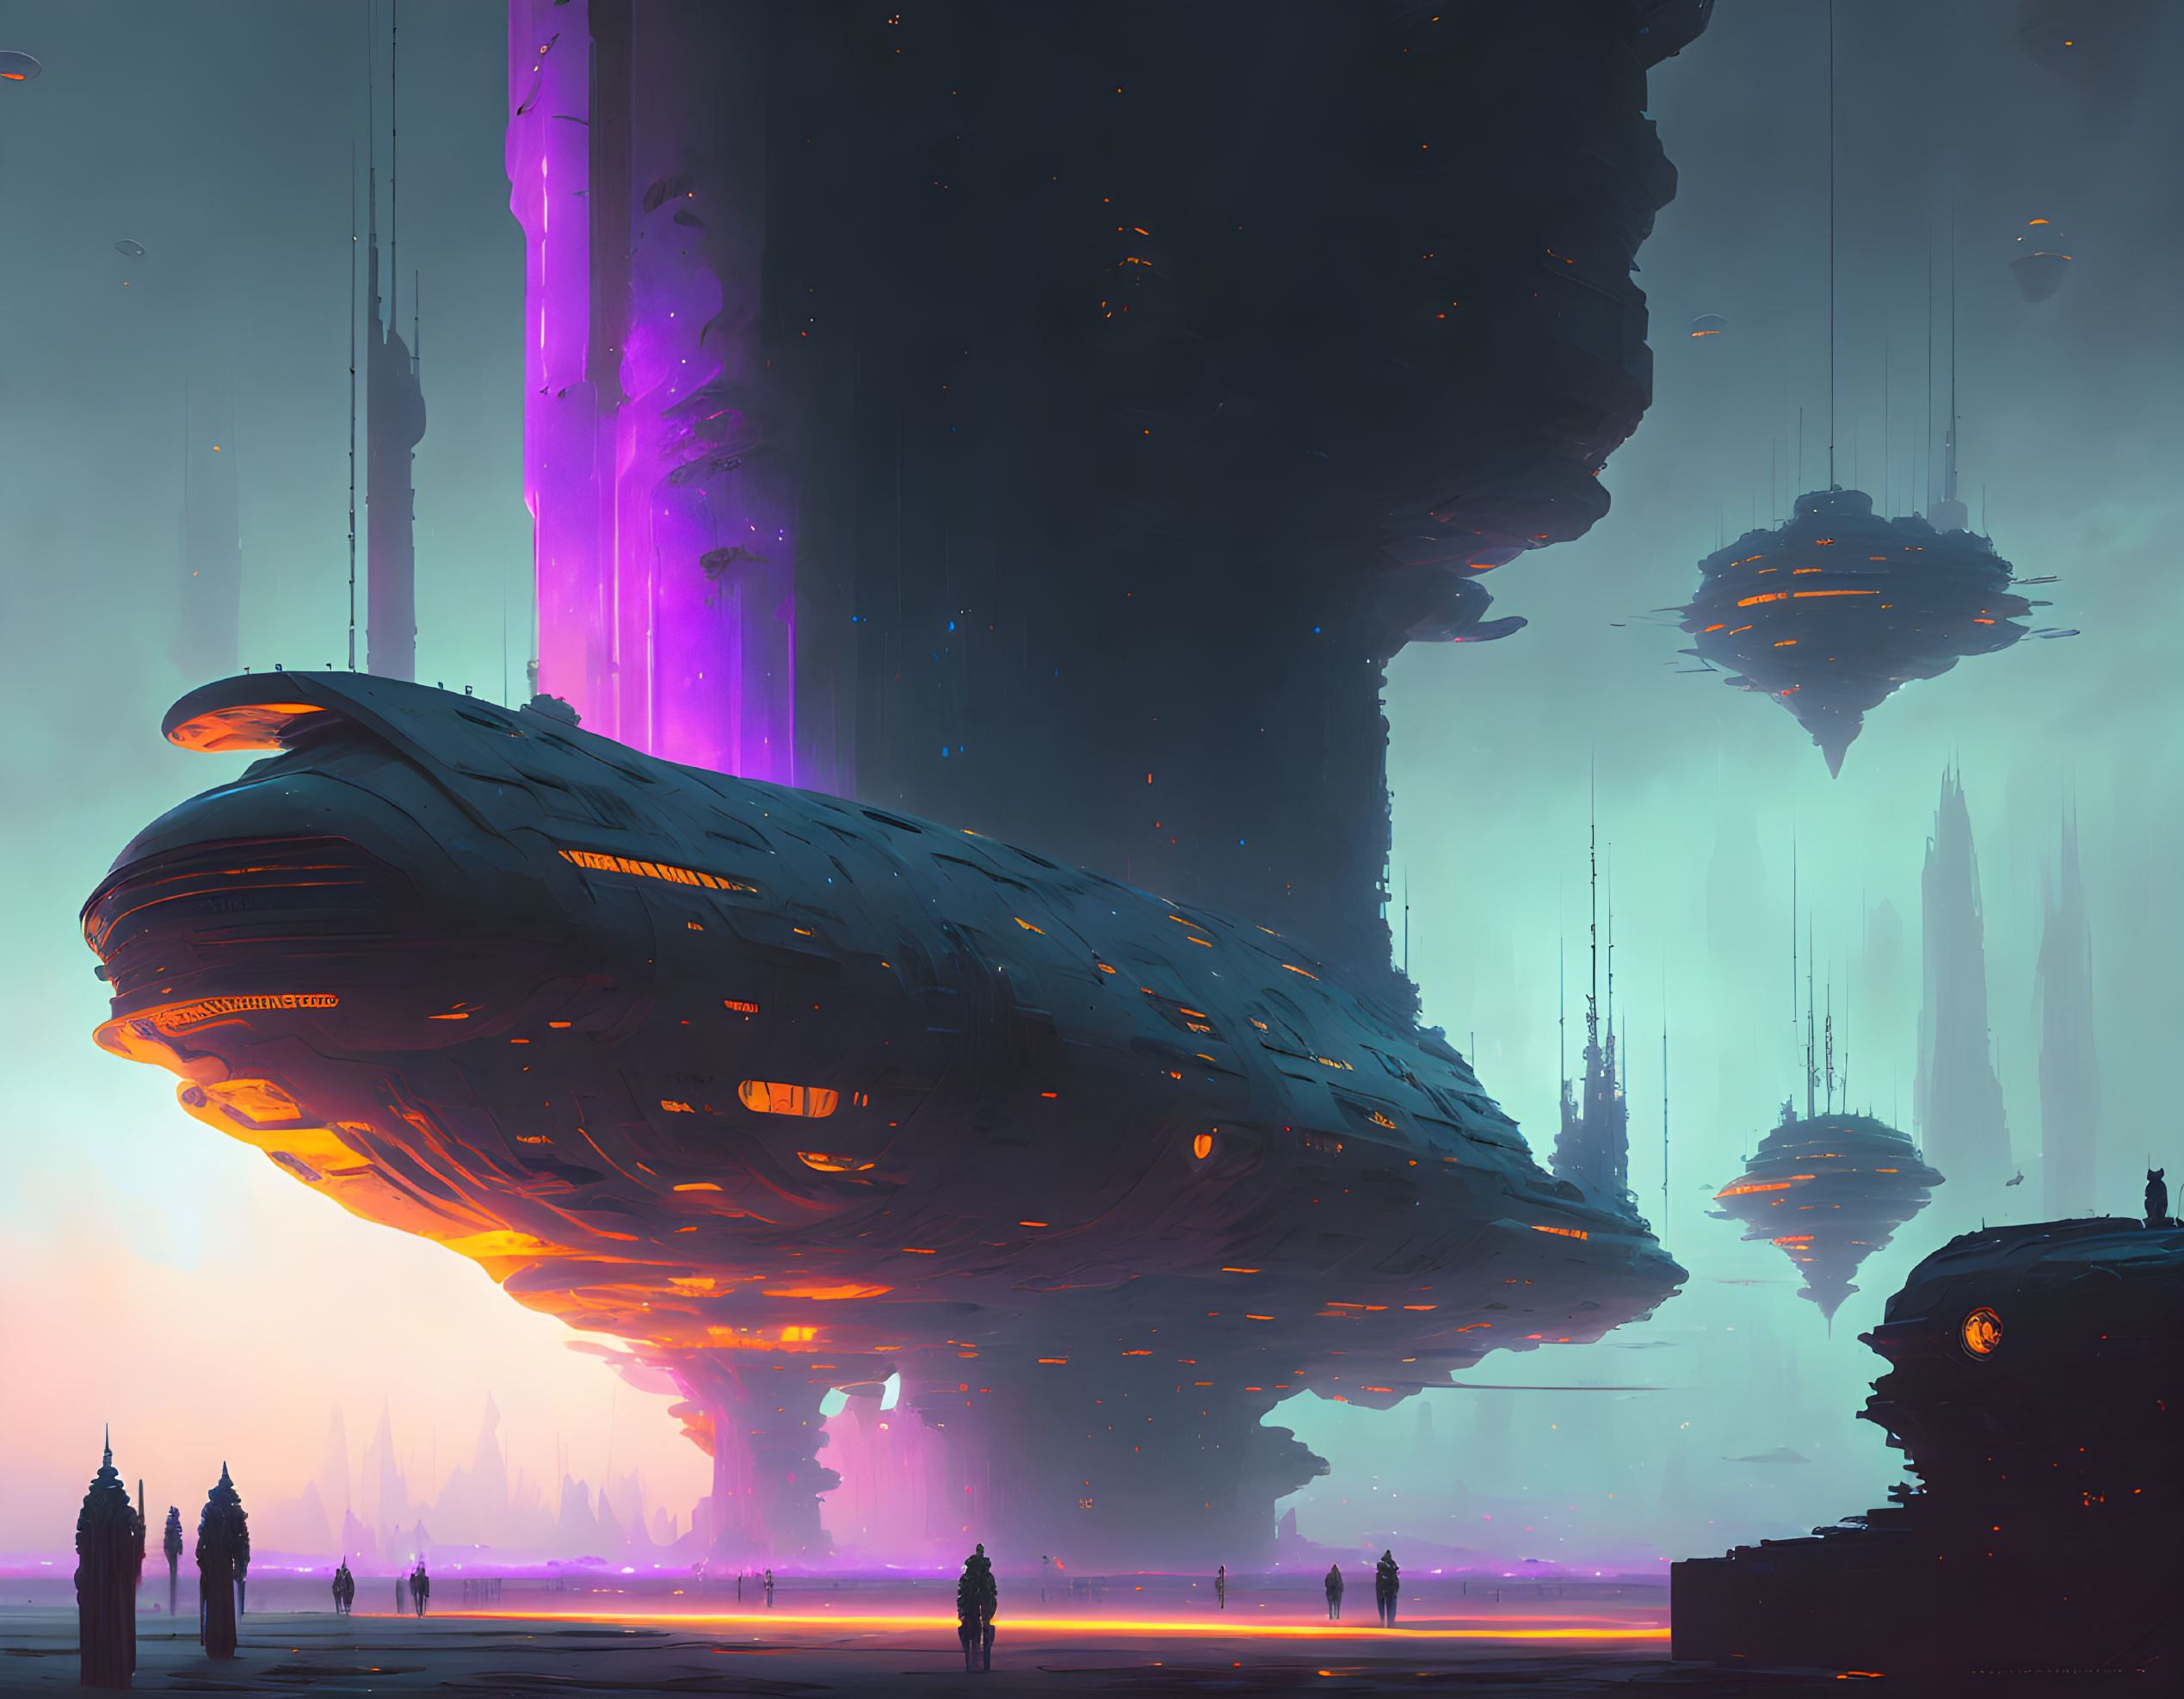 Futuristic cityscape with spaceship and silhouetted figures at twilight